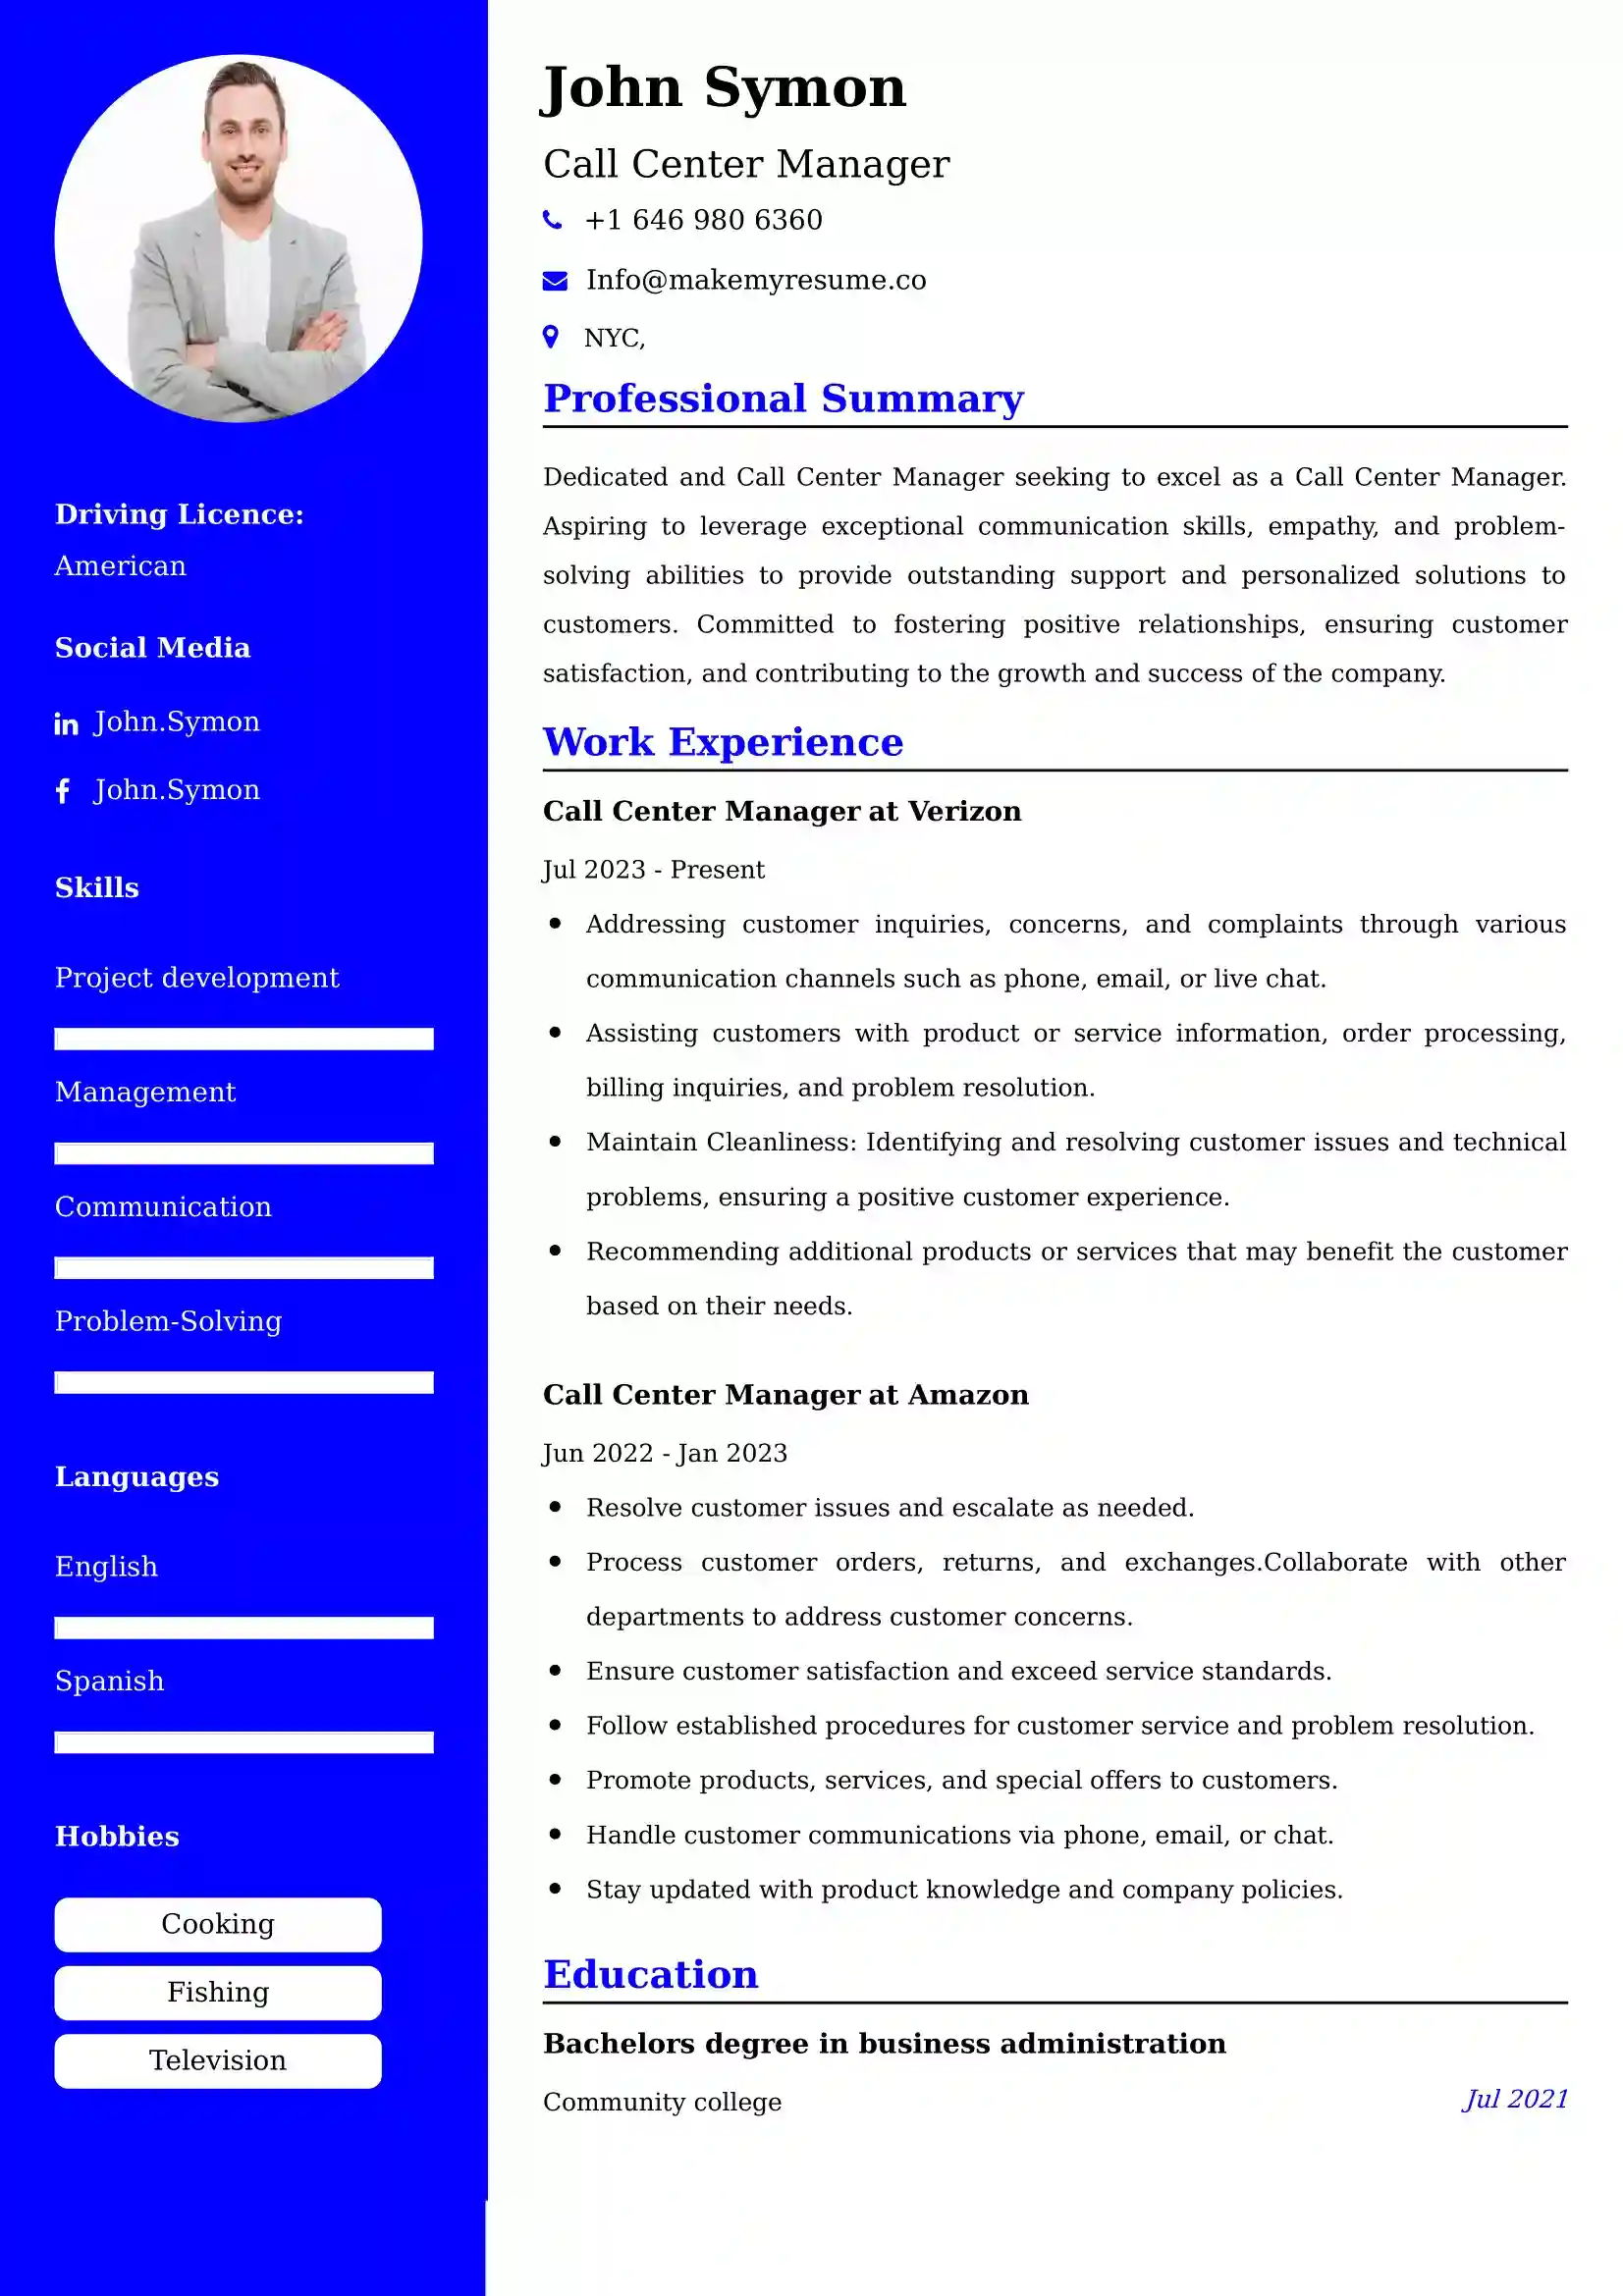 Call Center Manager Resume Examples - Brazilian Format, Latest Template